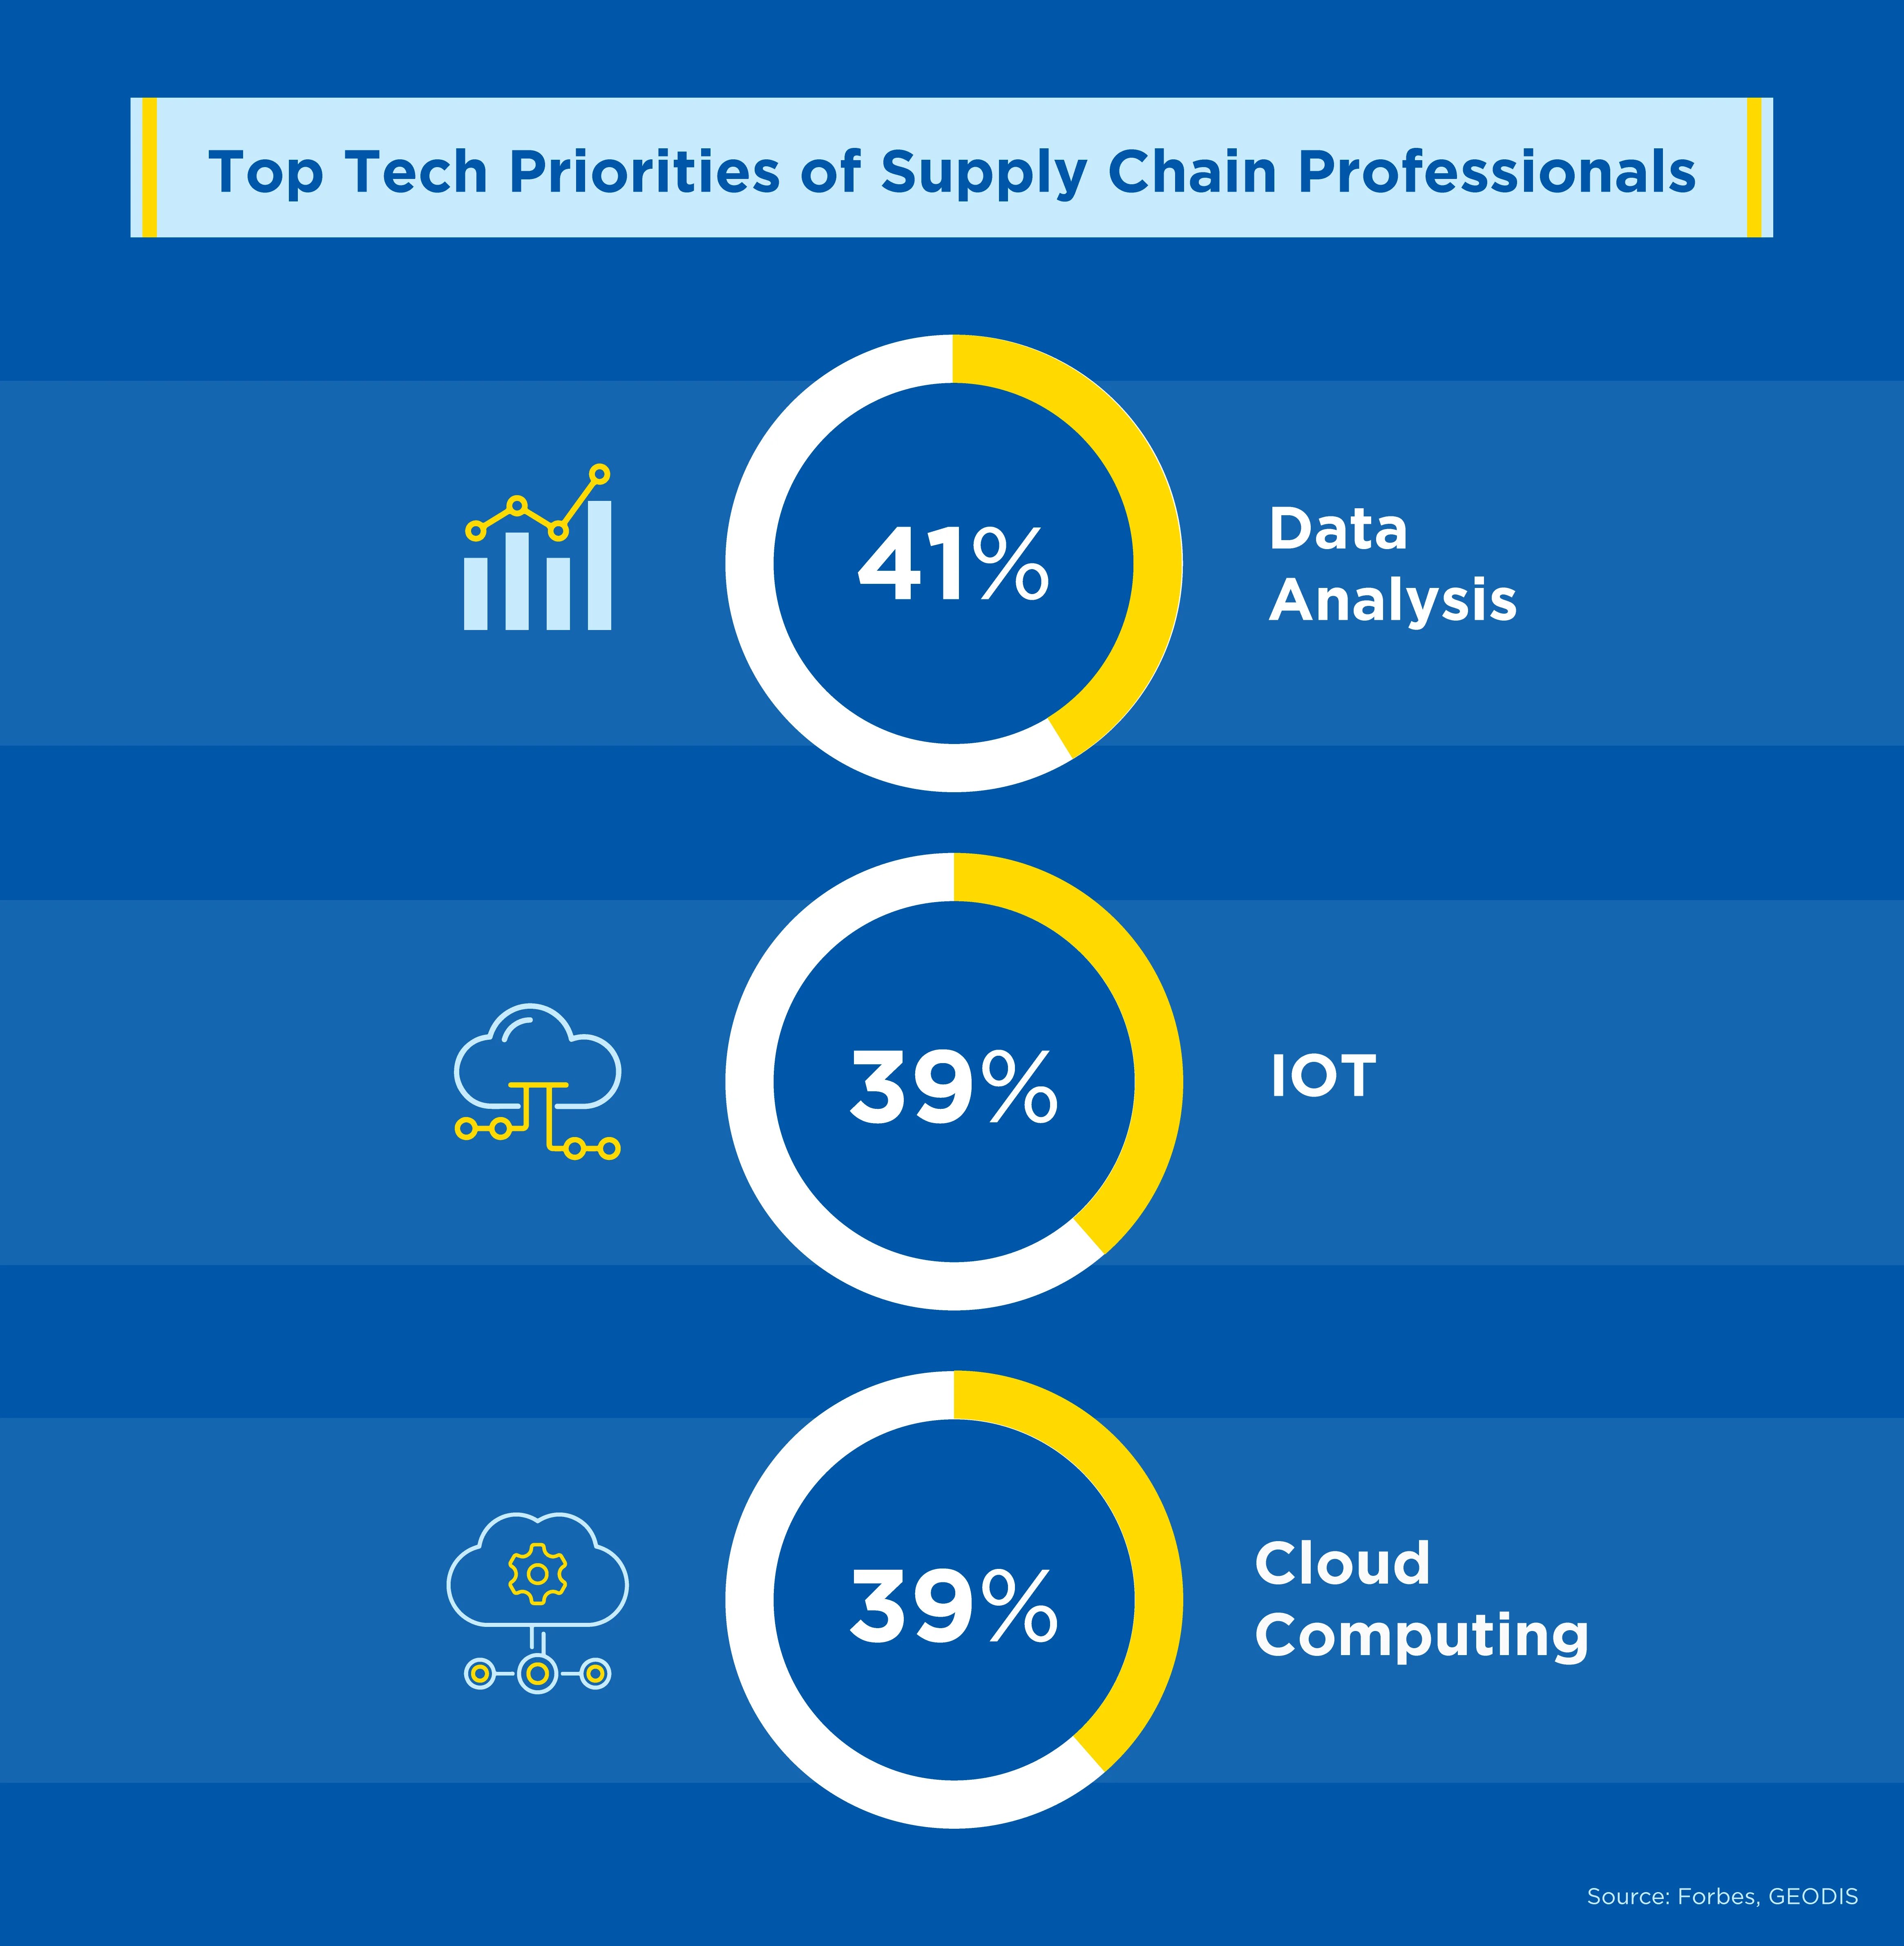 Top tech priorities of supply chain professionals